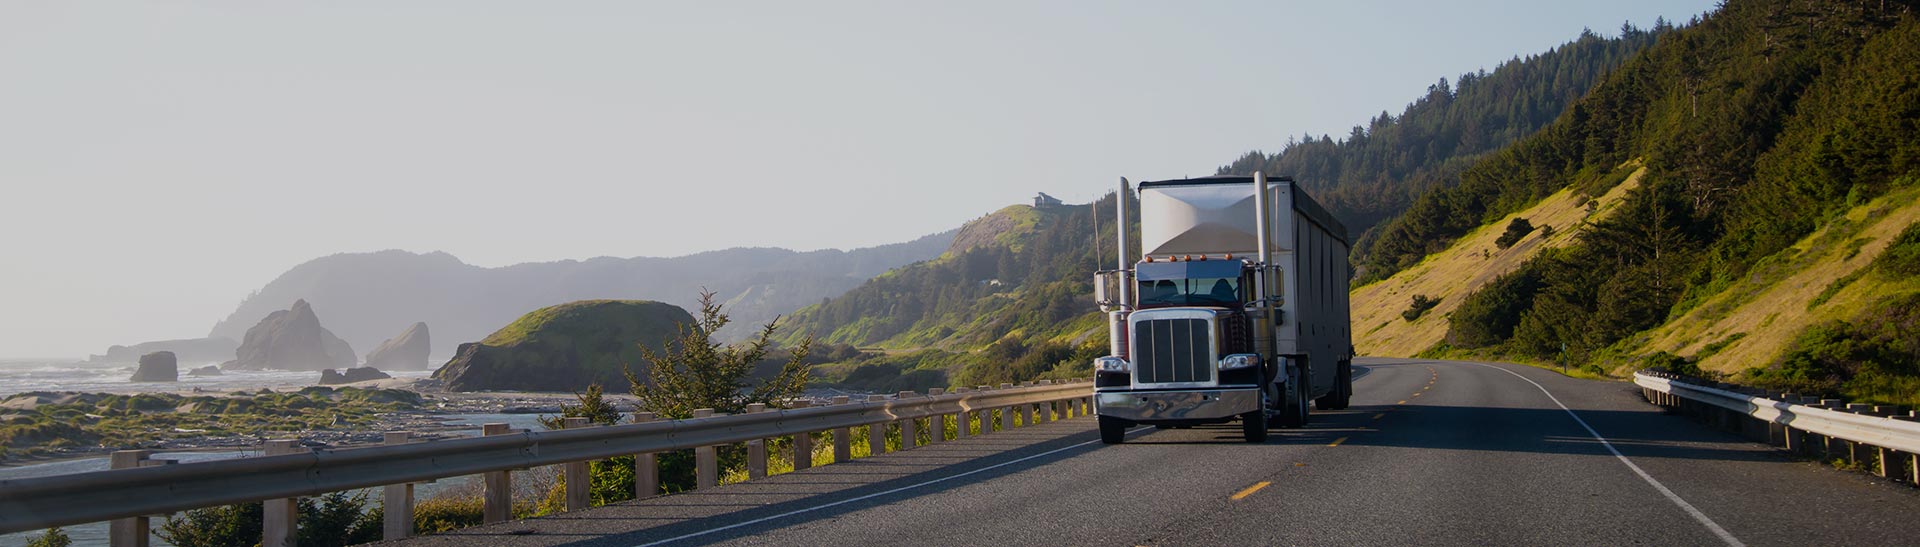 Atlanta Trucking Company, Trucking Services and Freight Forwarding Services